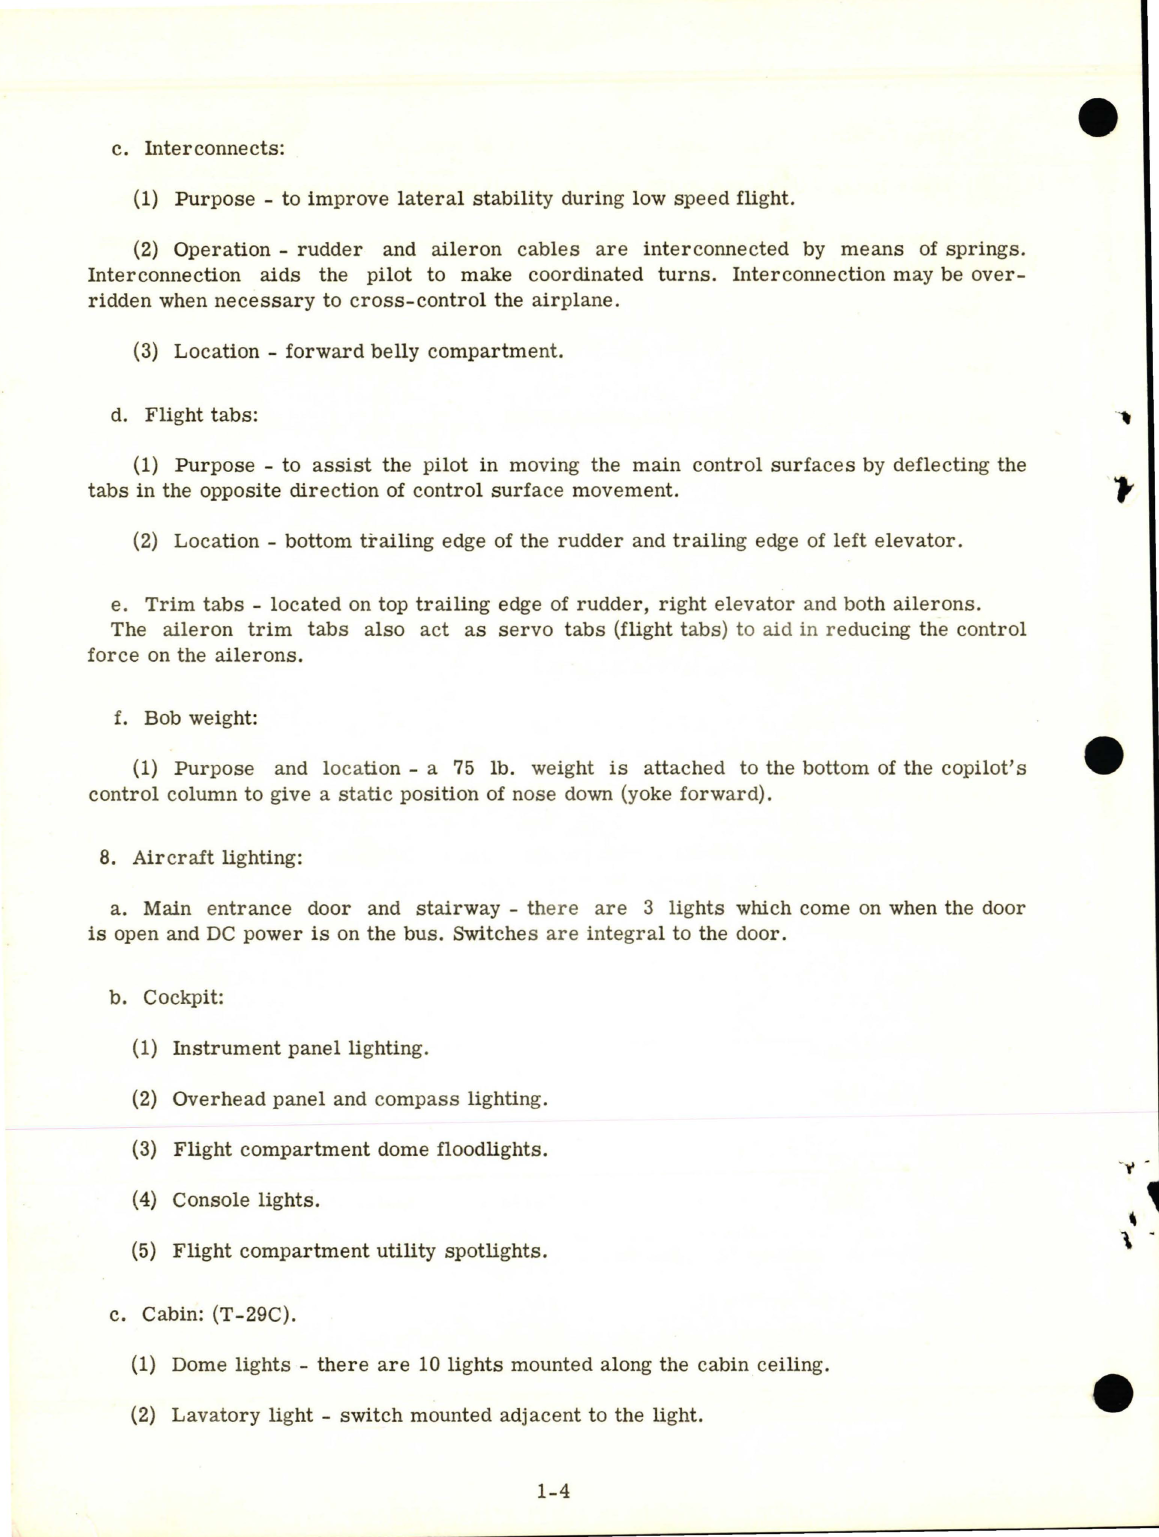 Sample page 8 from AirCorps Library document: Engineering Workbook for Pilots for T-29